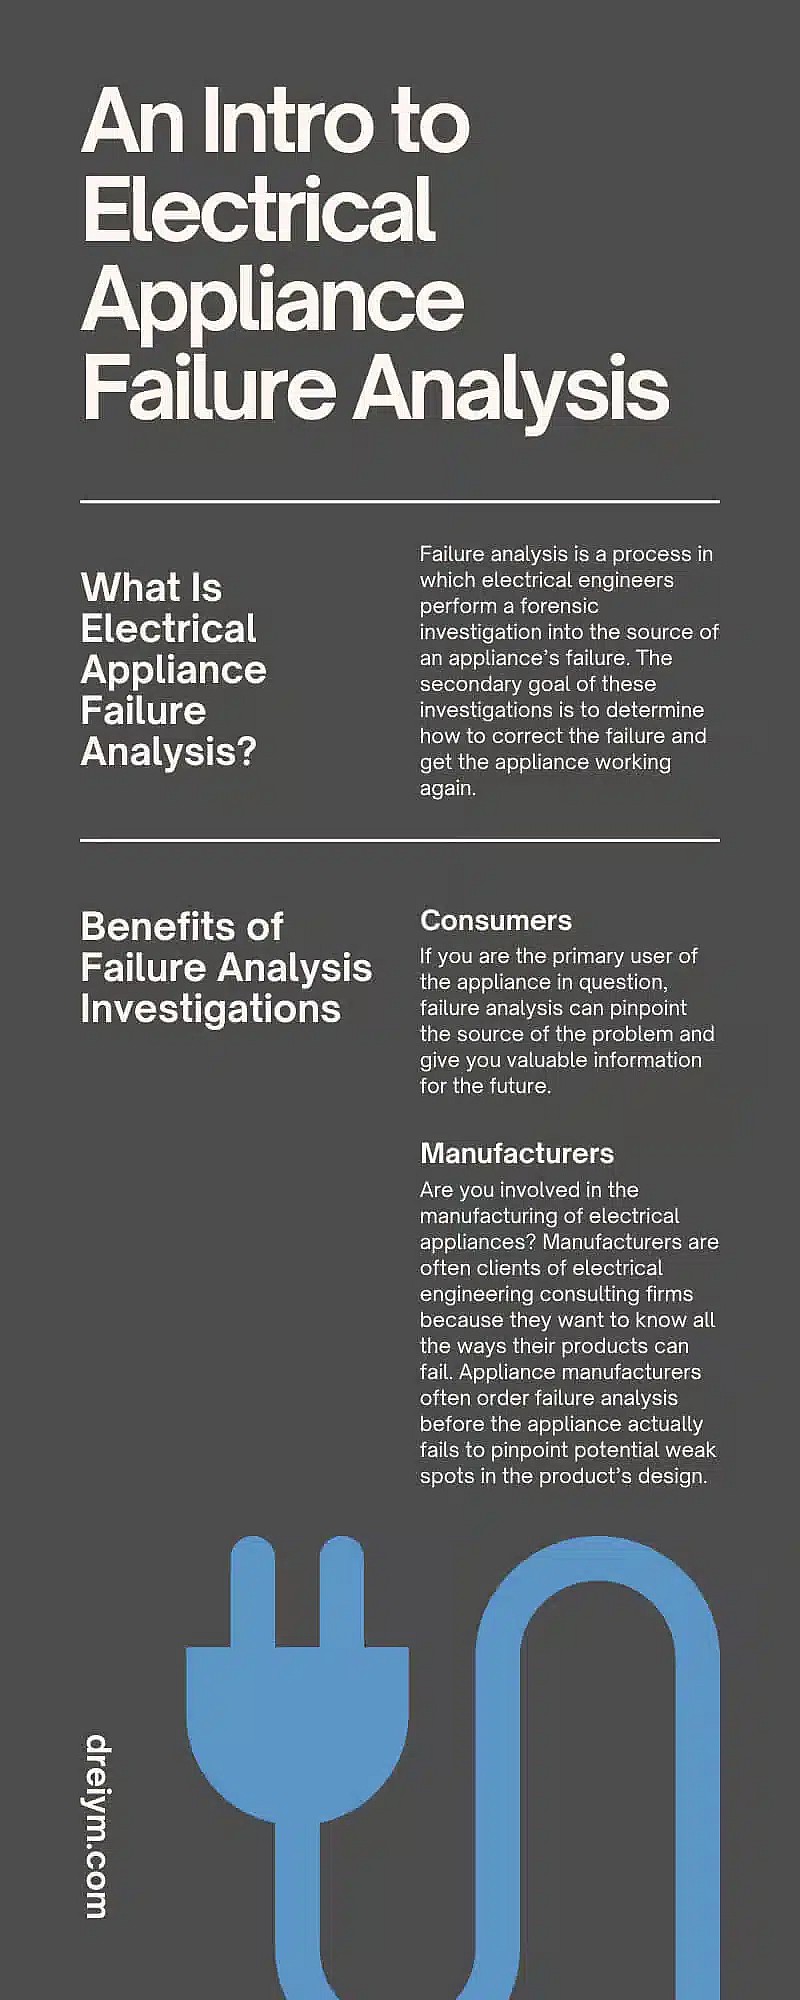 An Intro to Electrical Appliance Failure Analysis 